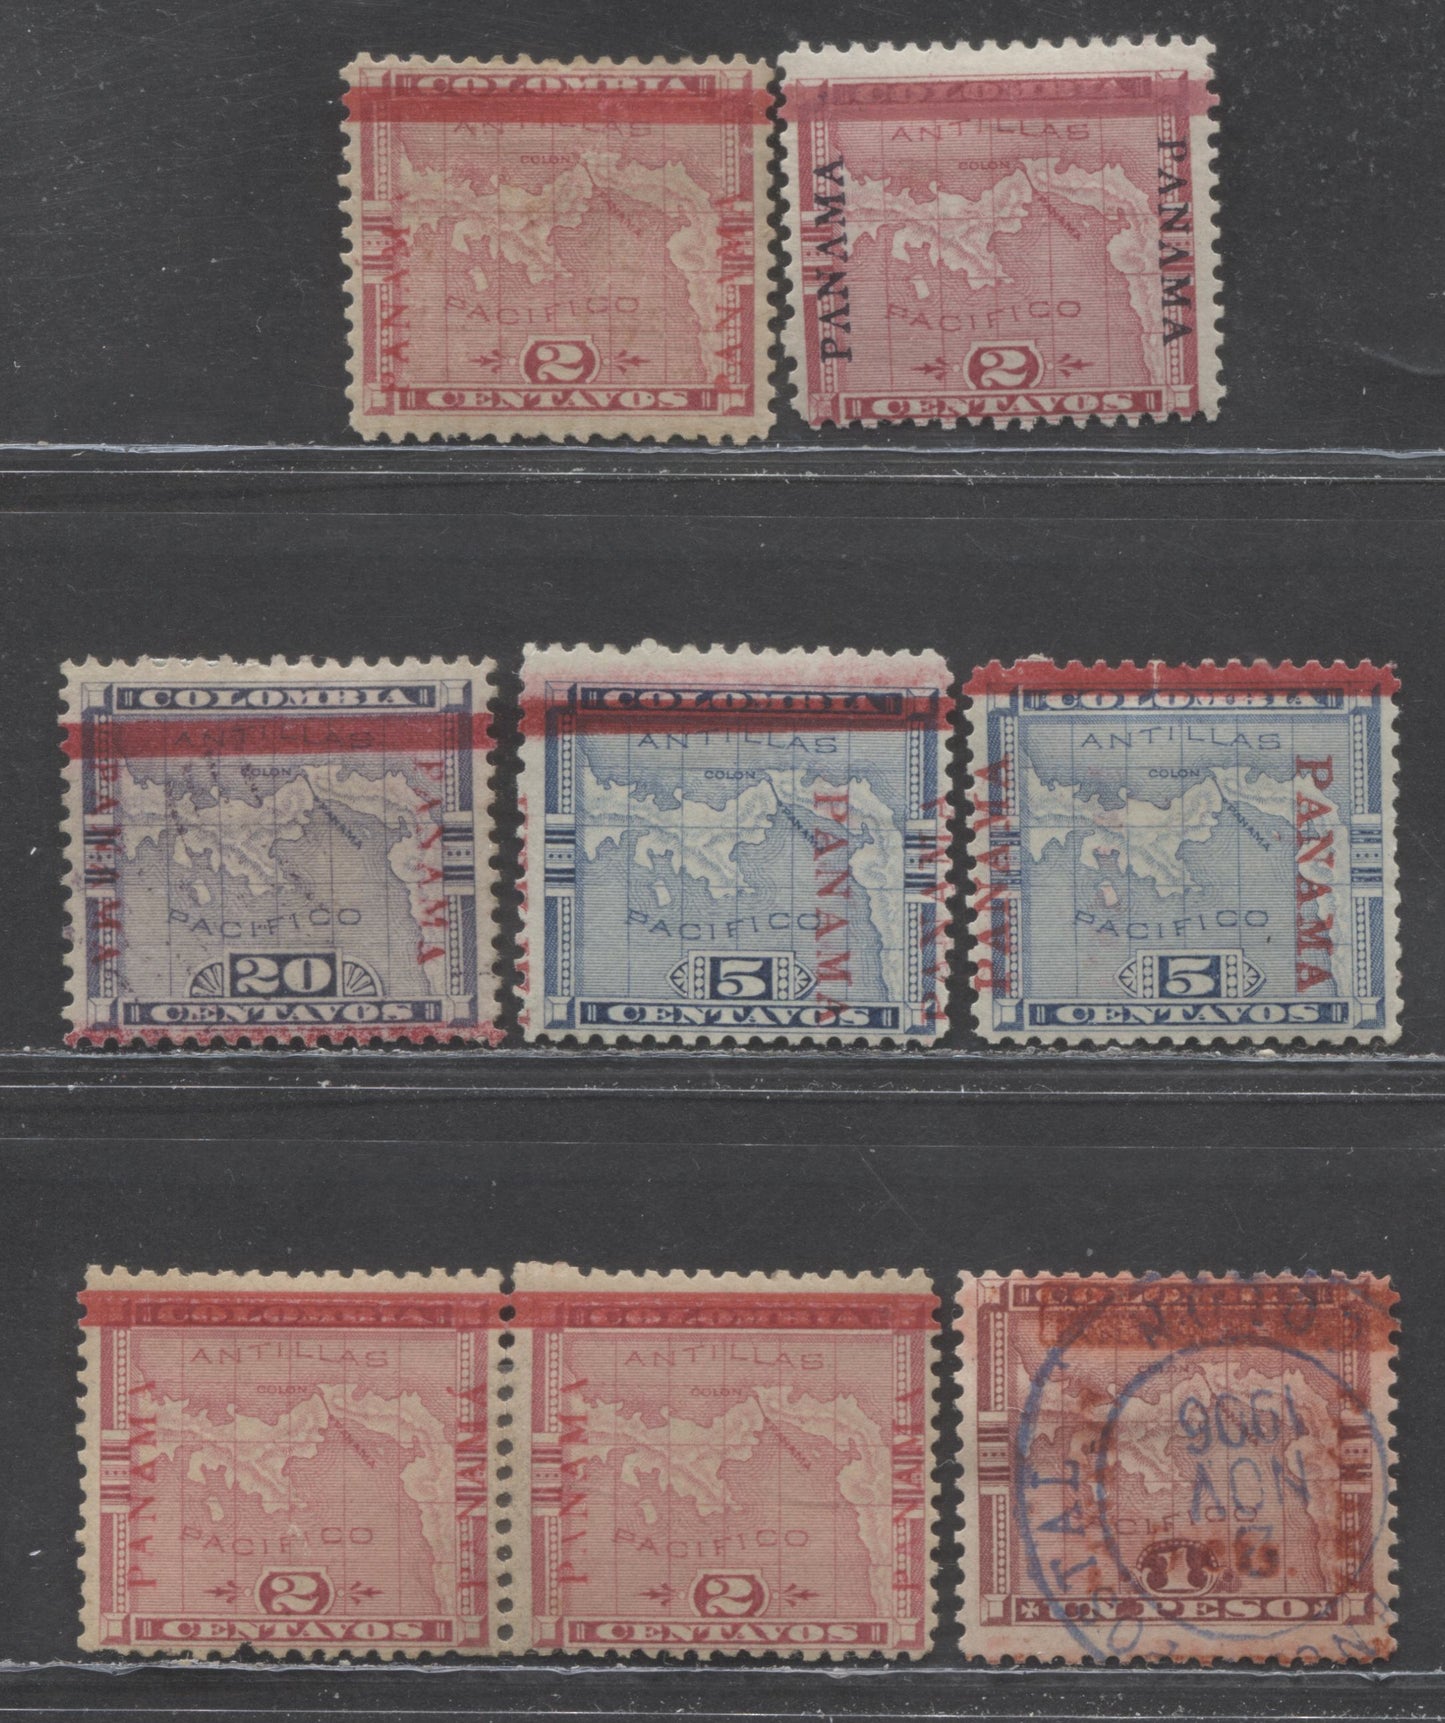 Lot 100 Panama SC#65/82 1903 Overprints & Varieties, 7 F/VFOG, Used & Unused Singles, Click on Listing to See ALL Pictures, 2022 Scott Classic Cat. $29.3 USD